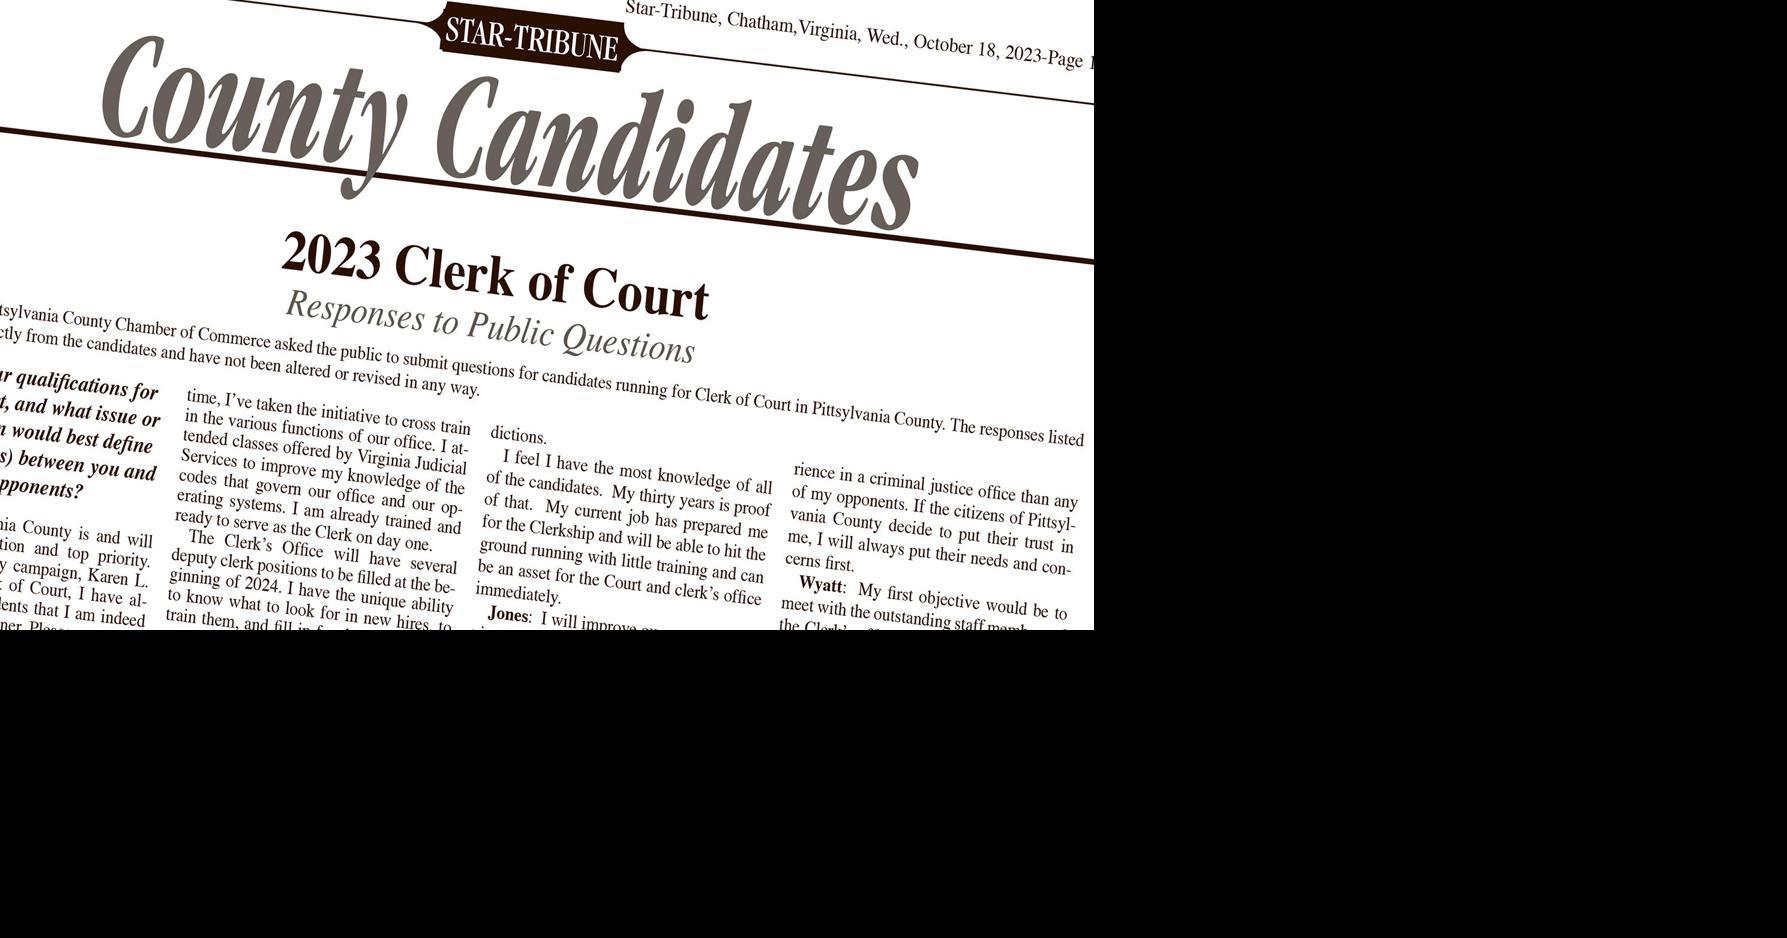 County Candidates: Responses to Public Questions, News